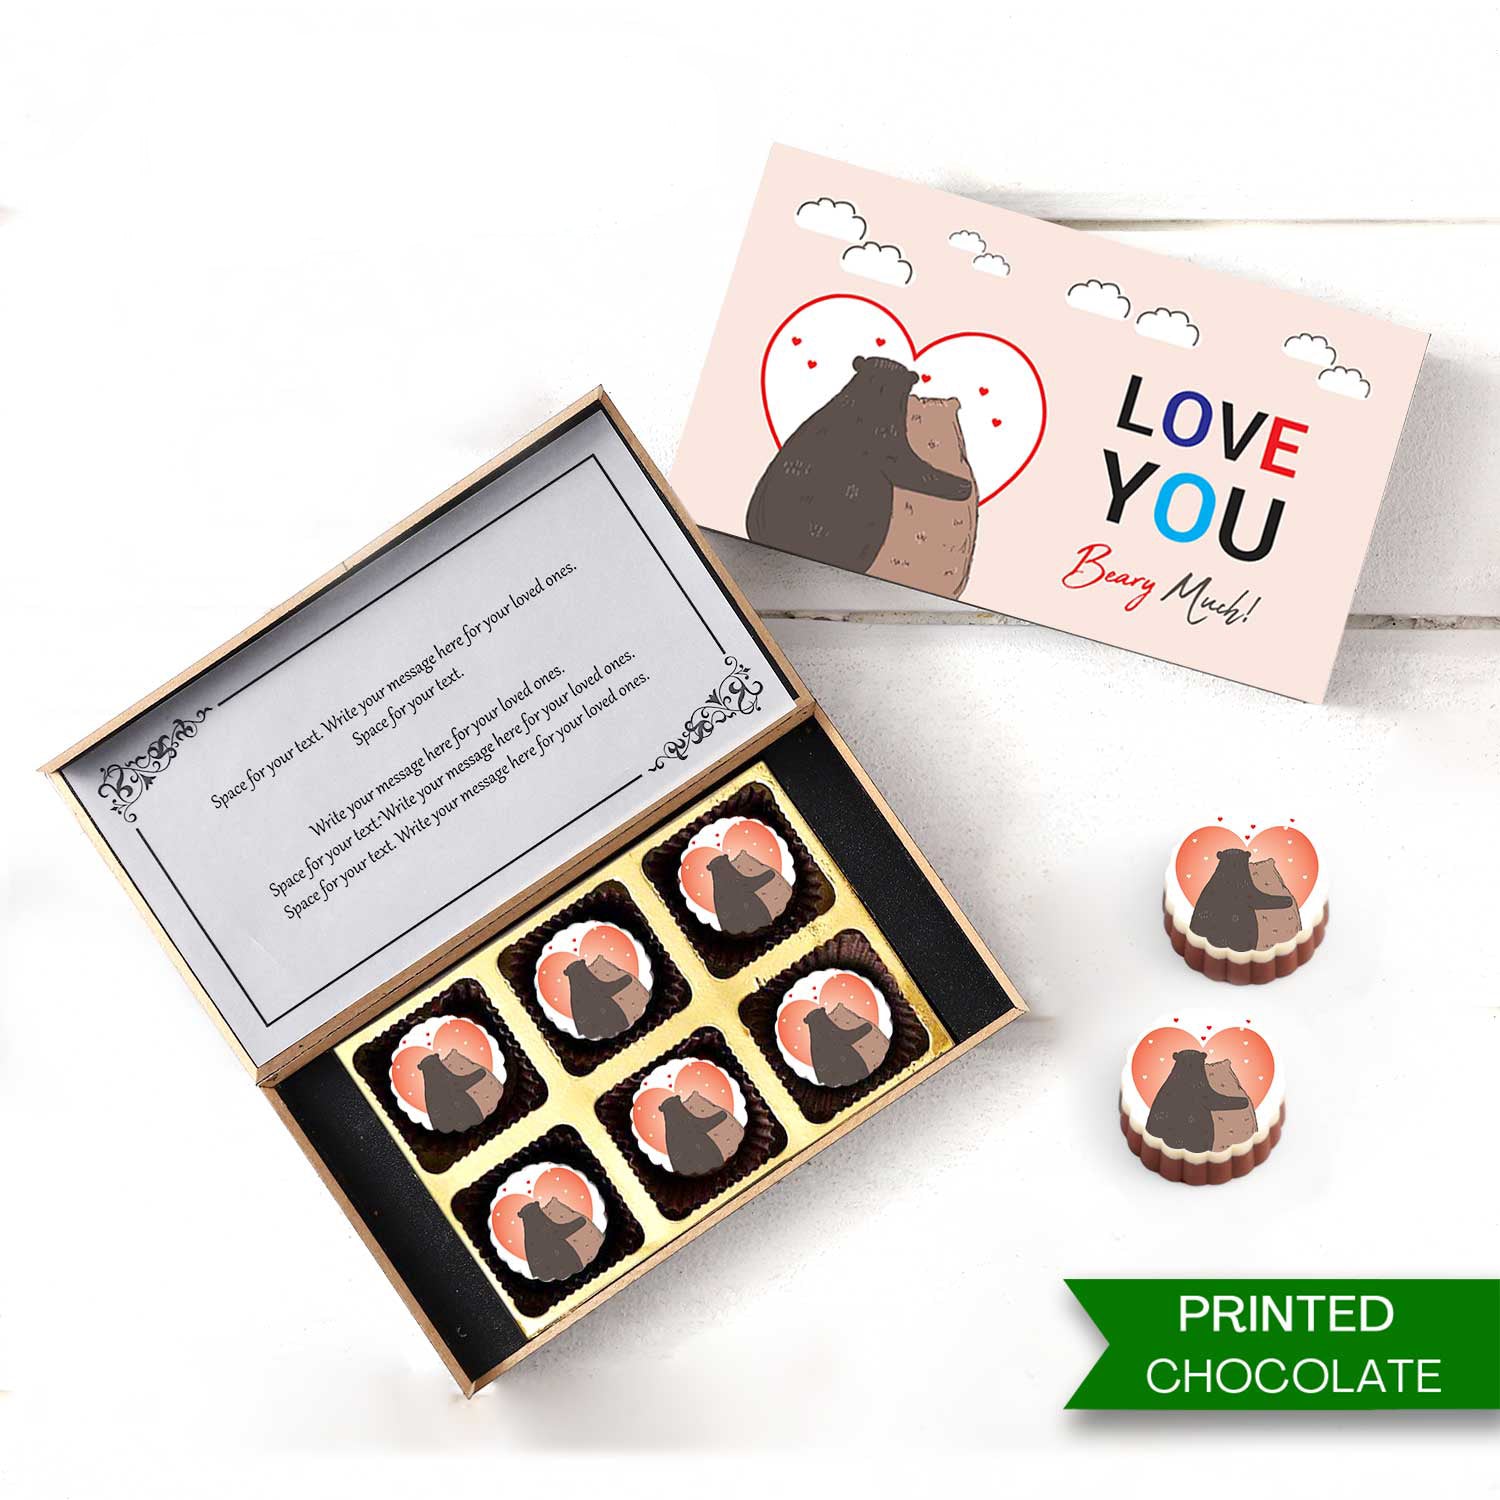 Love You Printed Chocolate Boxes with Personalisation - Choco ManualART